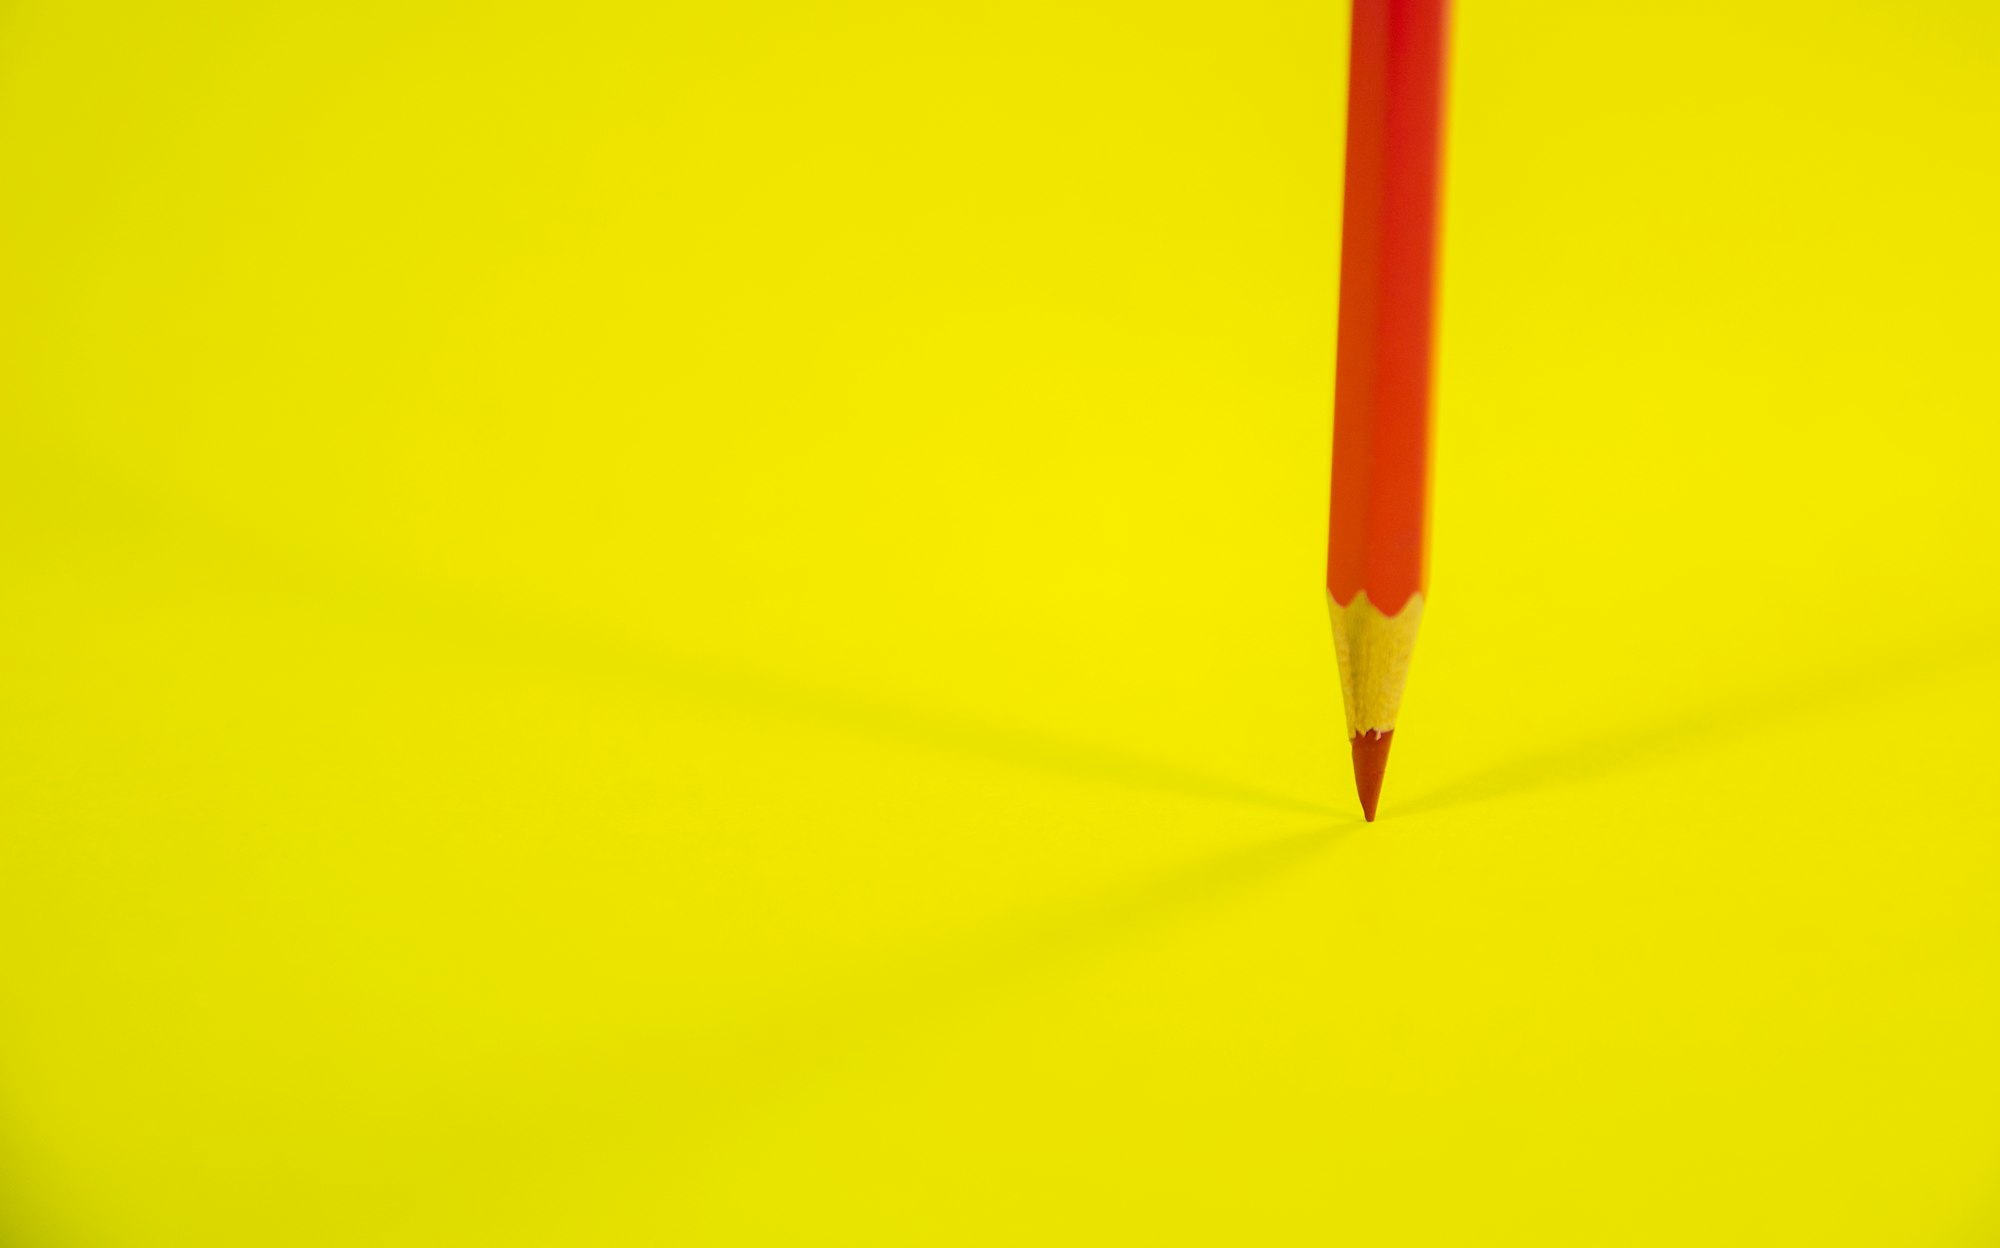 Red Color Pencil on Yellow Background 